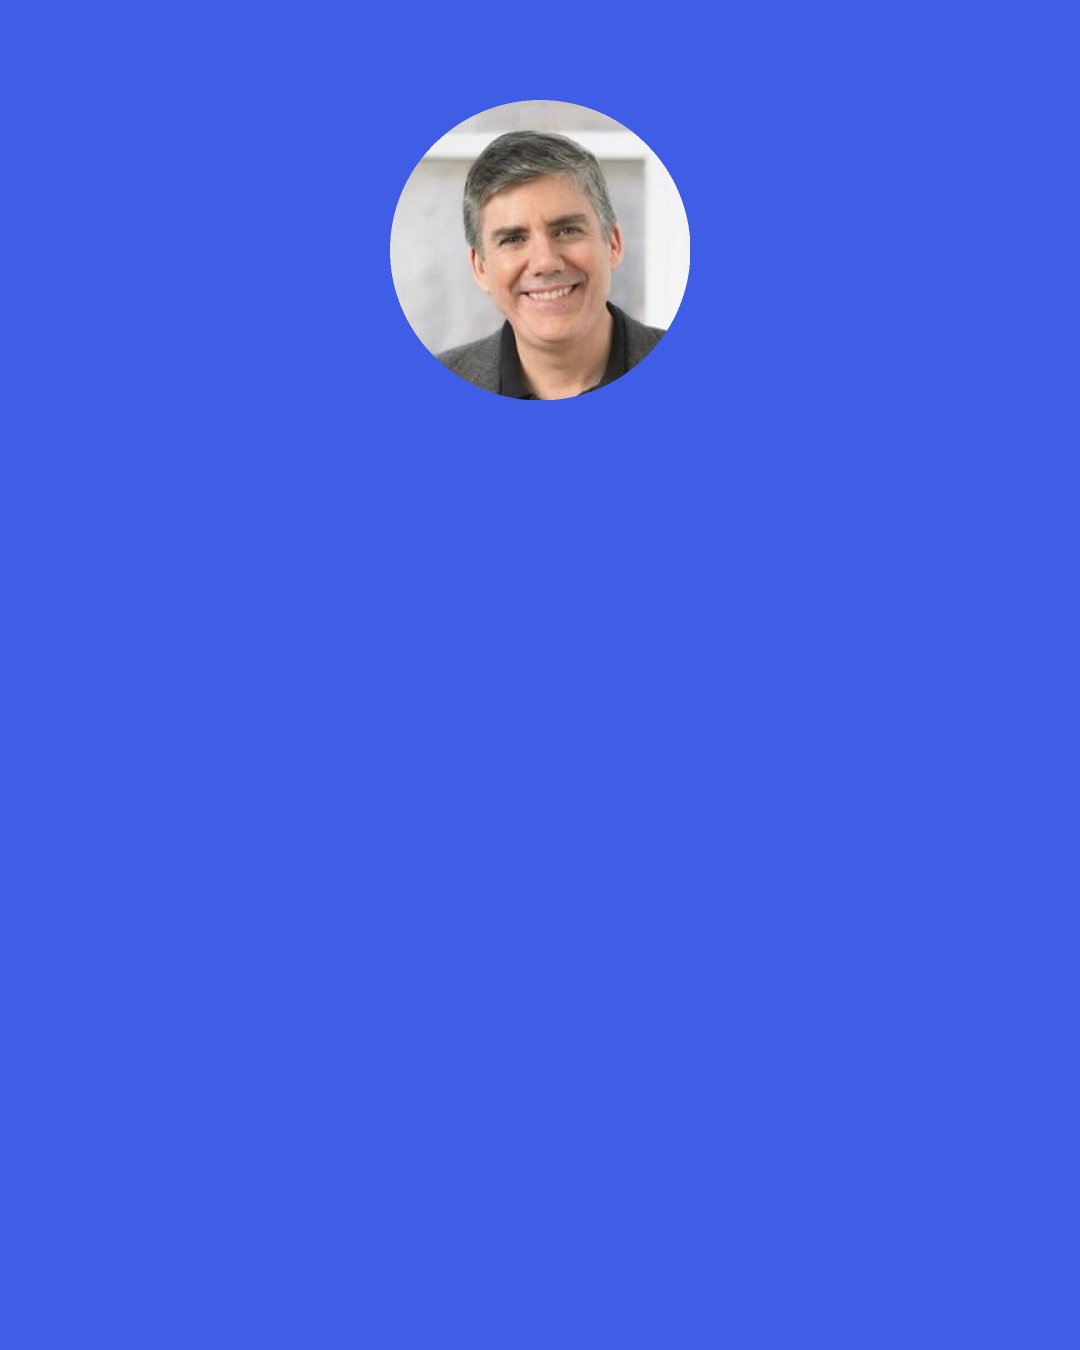 Rick Riordan: Apparently, word of the chicken man incident hadn’t spread quite yet.